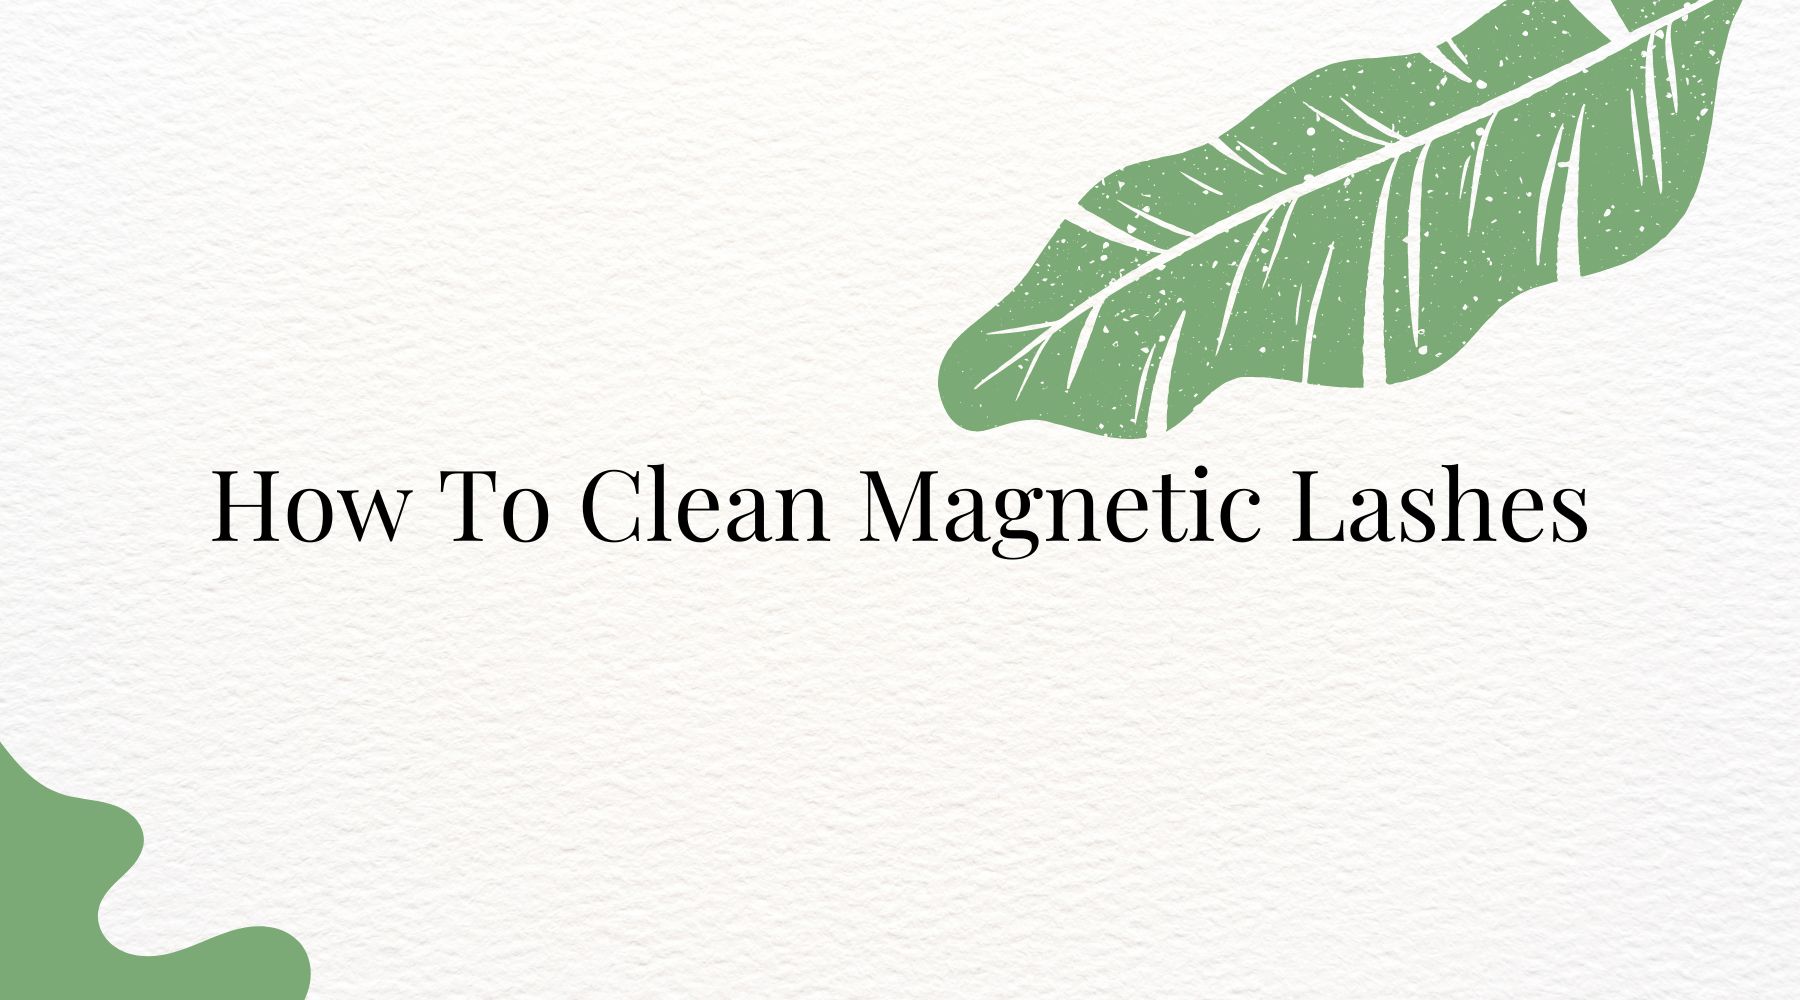 How To Clean Magnetic Lashes